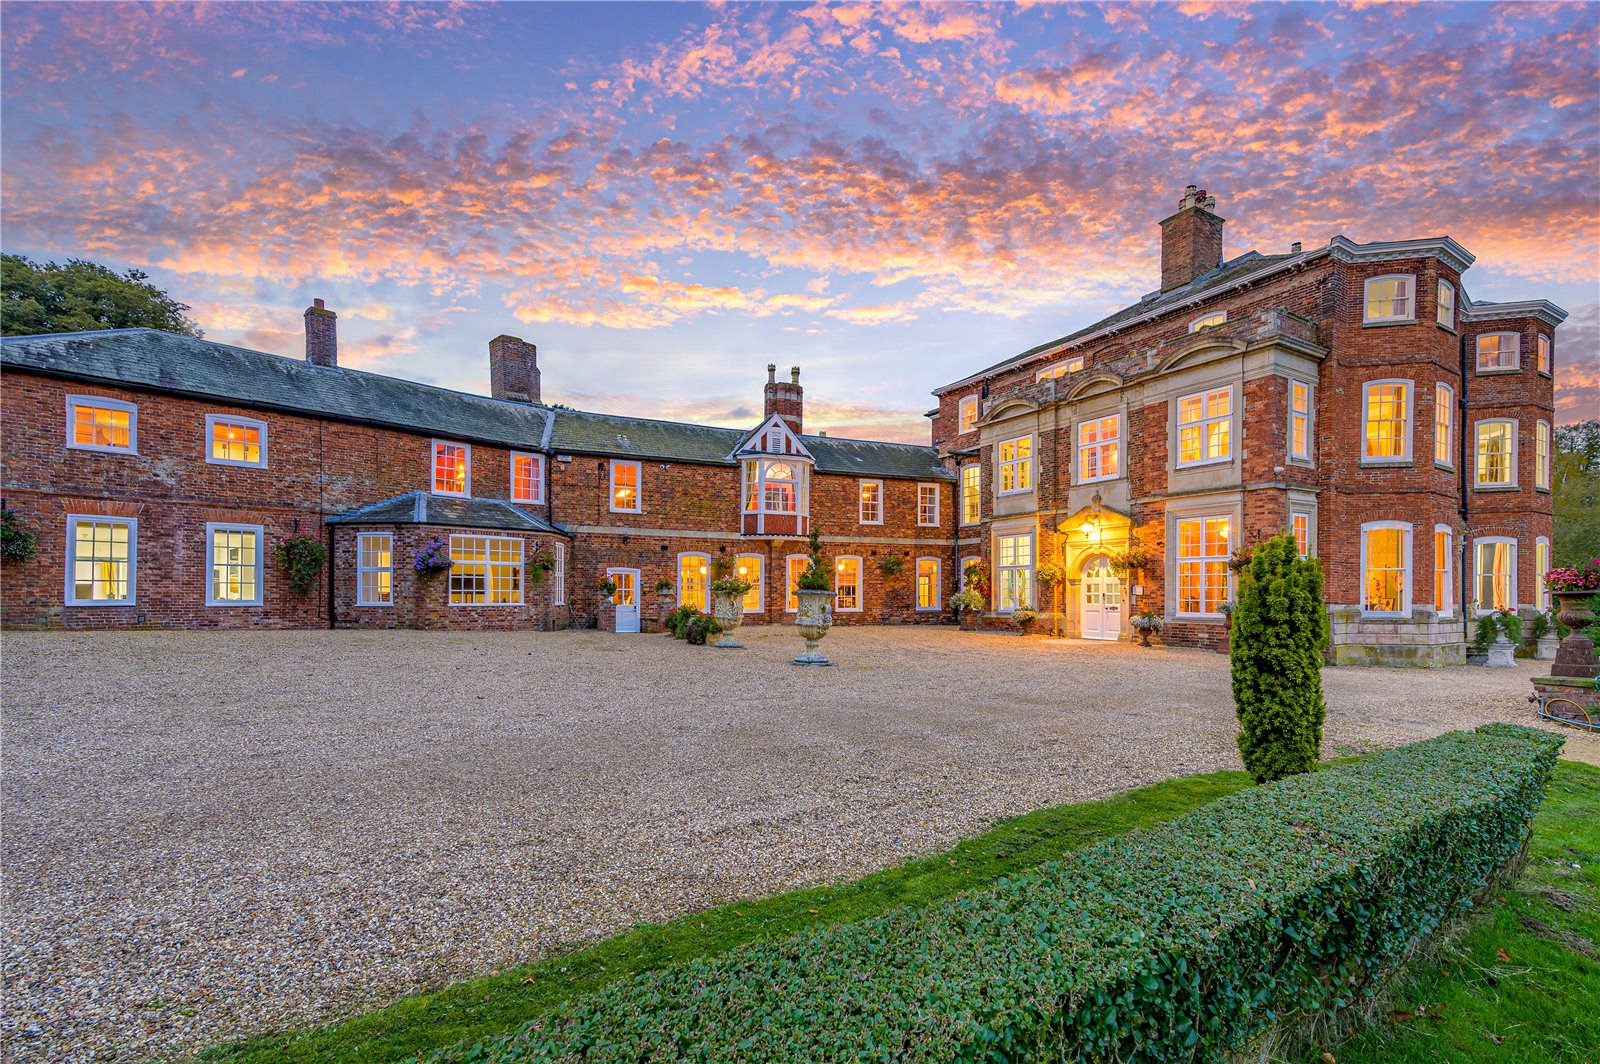 Property in Spilsby, Lincolnshire, 16 Bedrooms